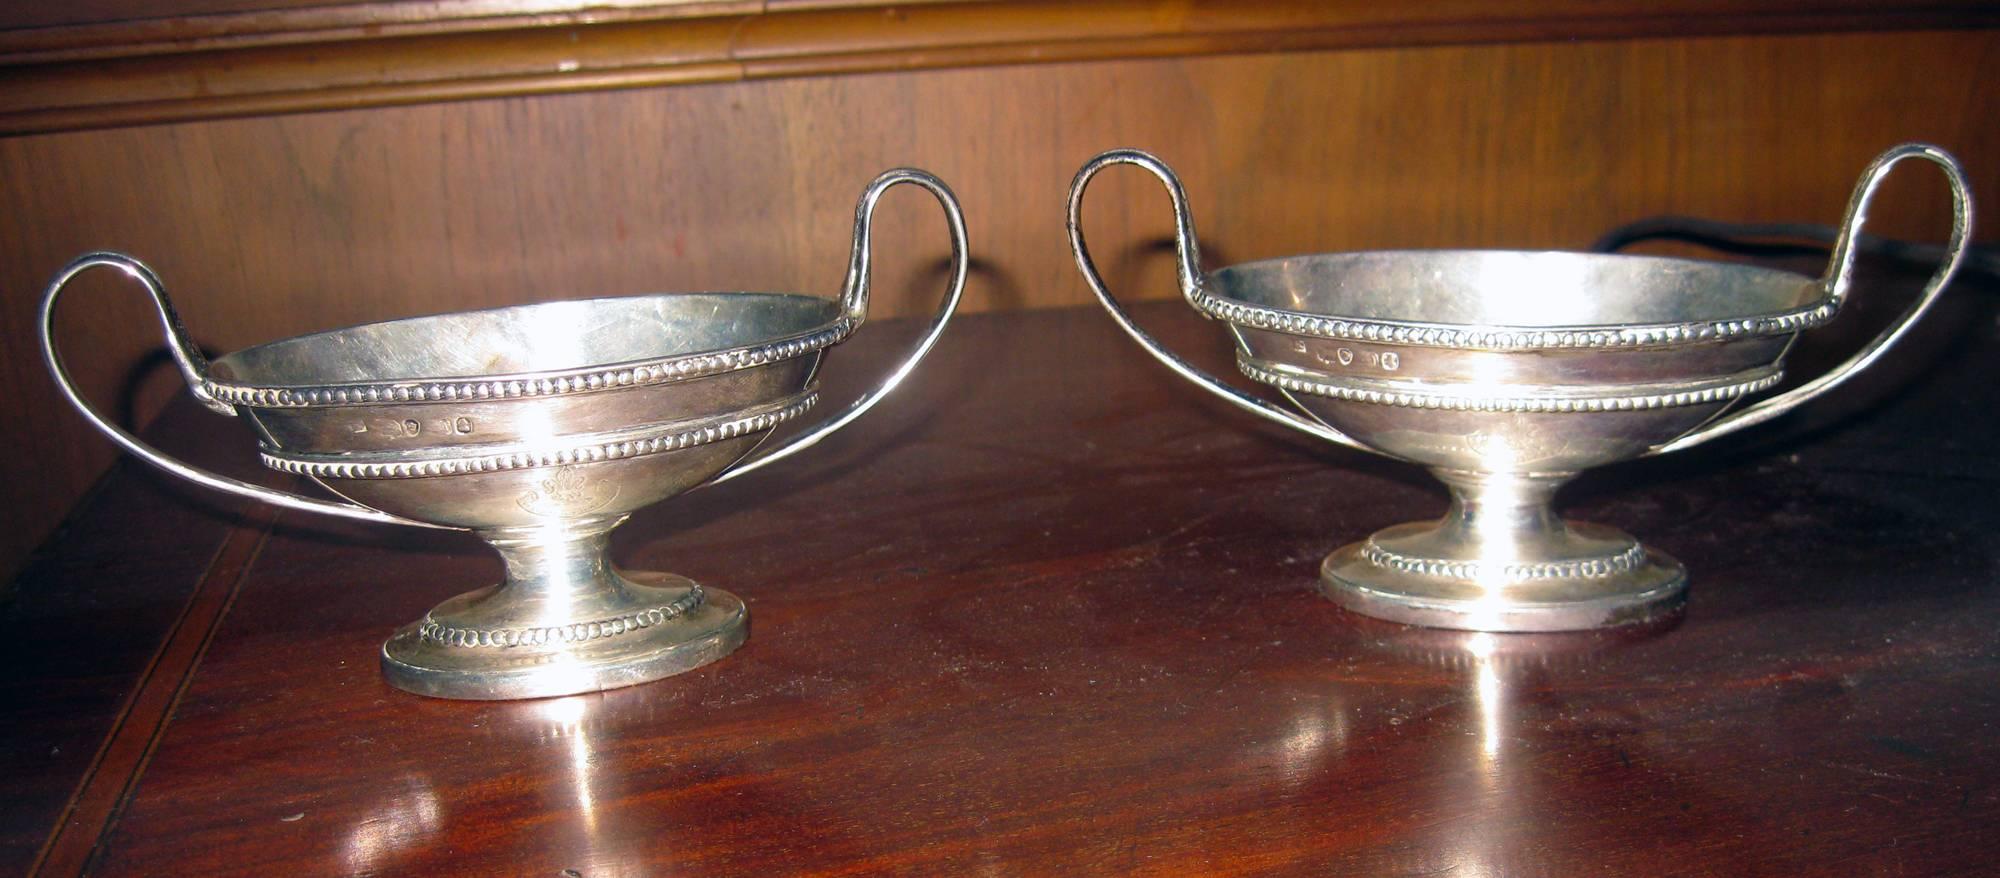 Classic pair of Georgian sterling silver master salts with a graceful oval form and standing on plain oval spread foot. Each salt has a pair of reeded loop handles. The tops of the salts and the foot are embellished with a Classic bead pattern and